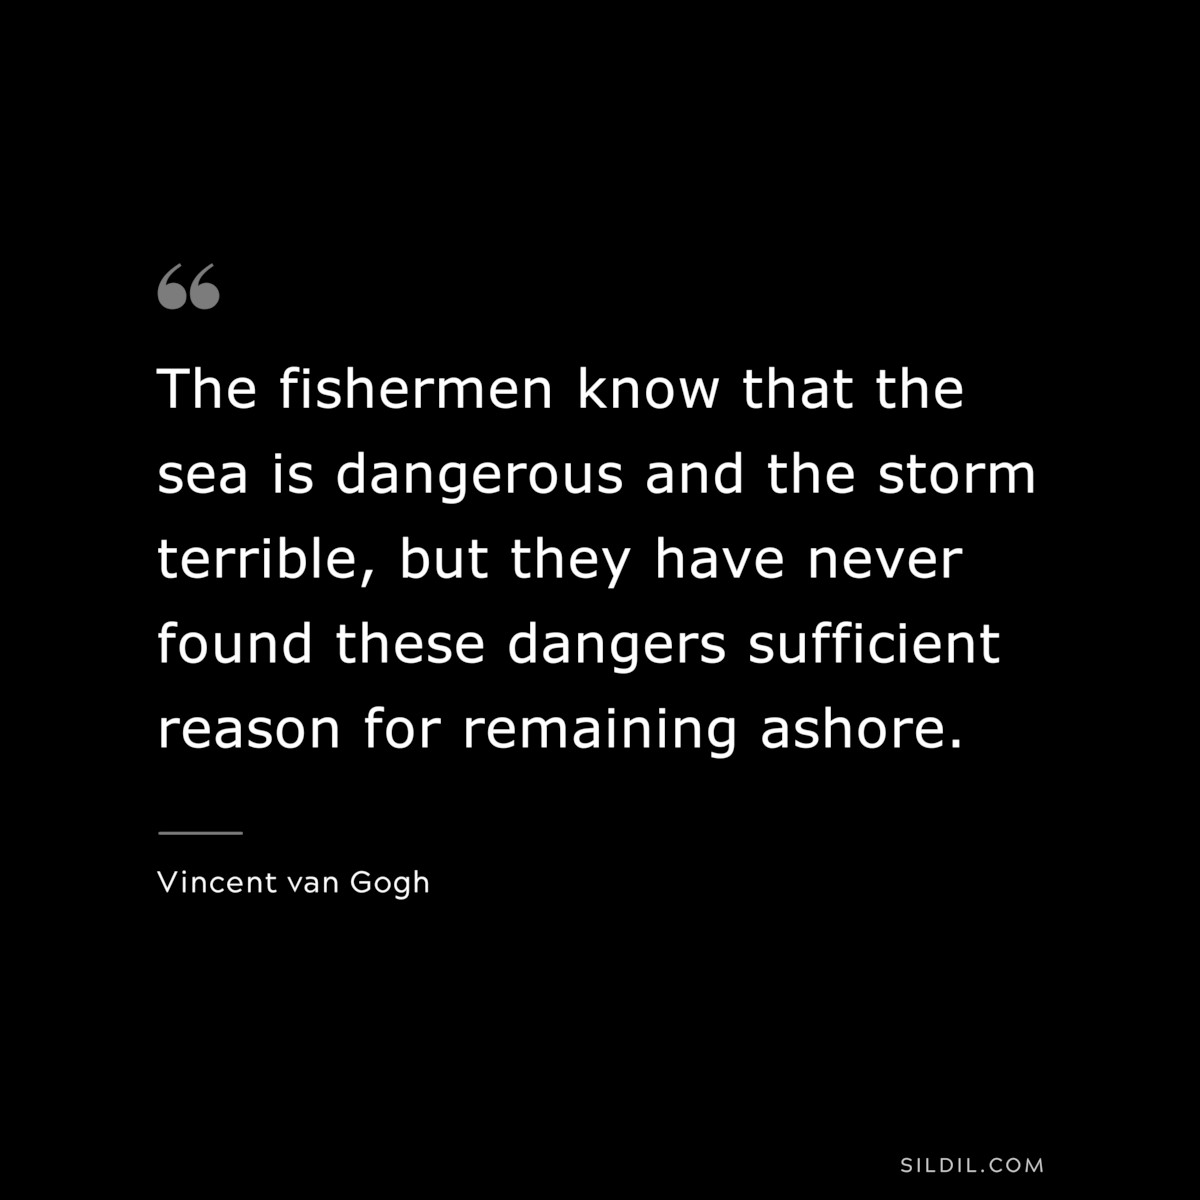 The fishermen know that the sea is dangerous and the storm terrible, but they have never found these dangers sufficient reason for remaining ashore. ― Vincent van Gogh